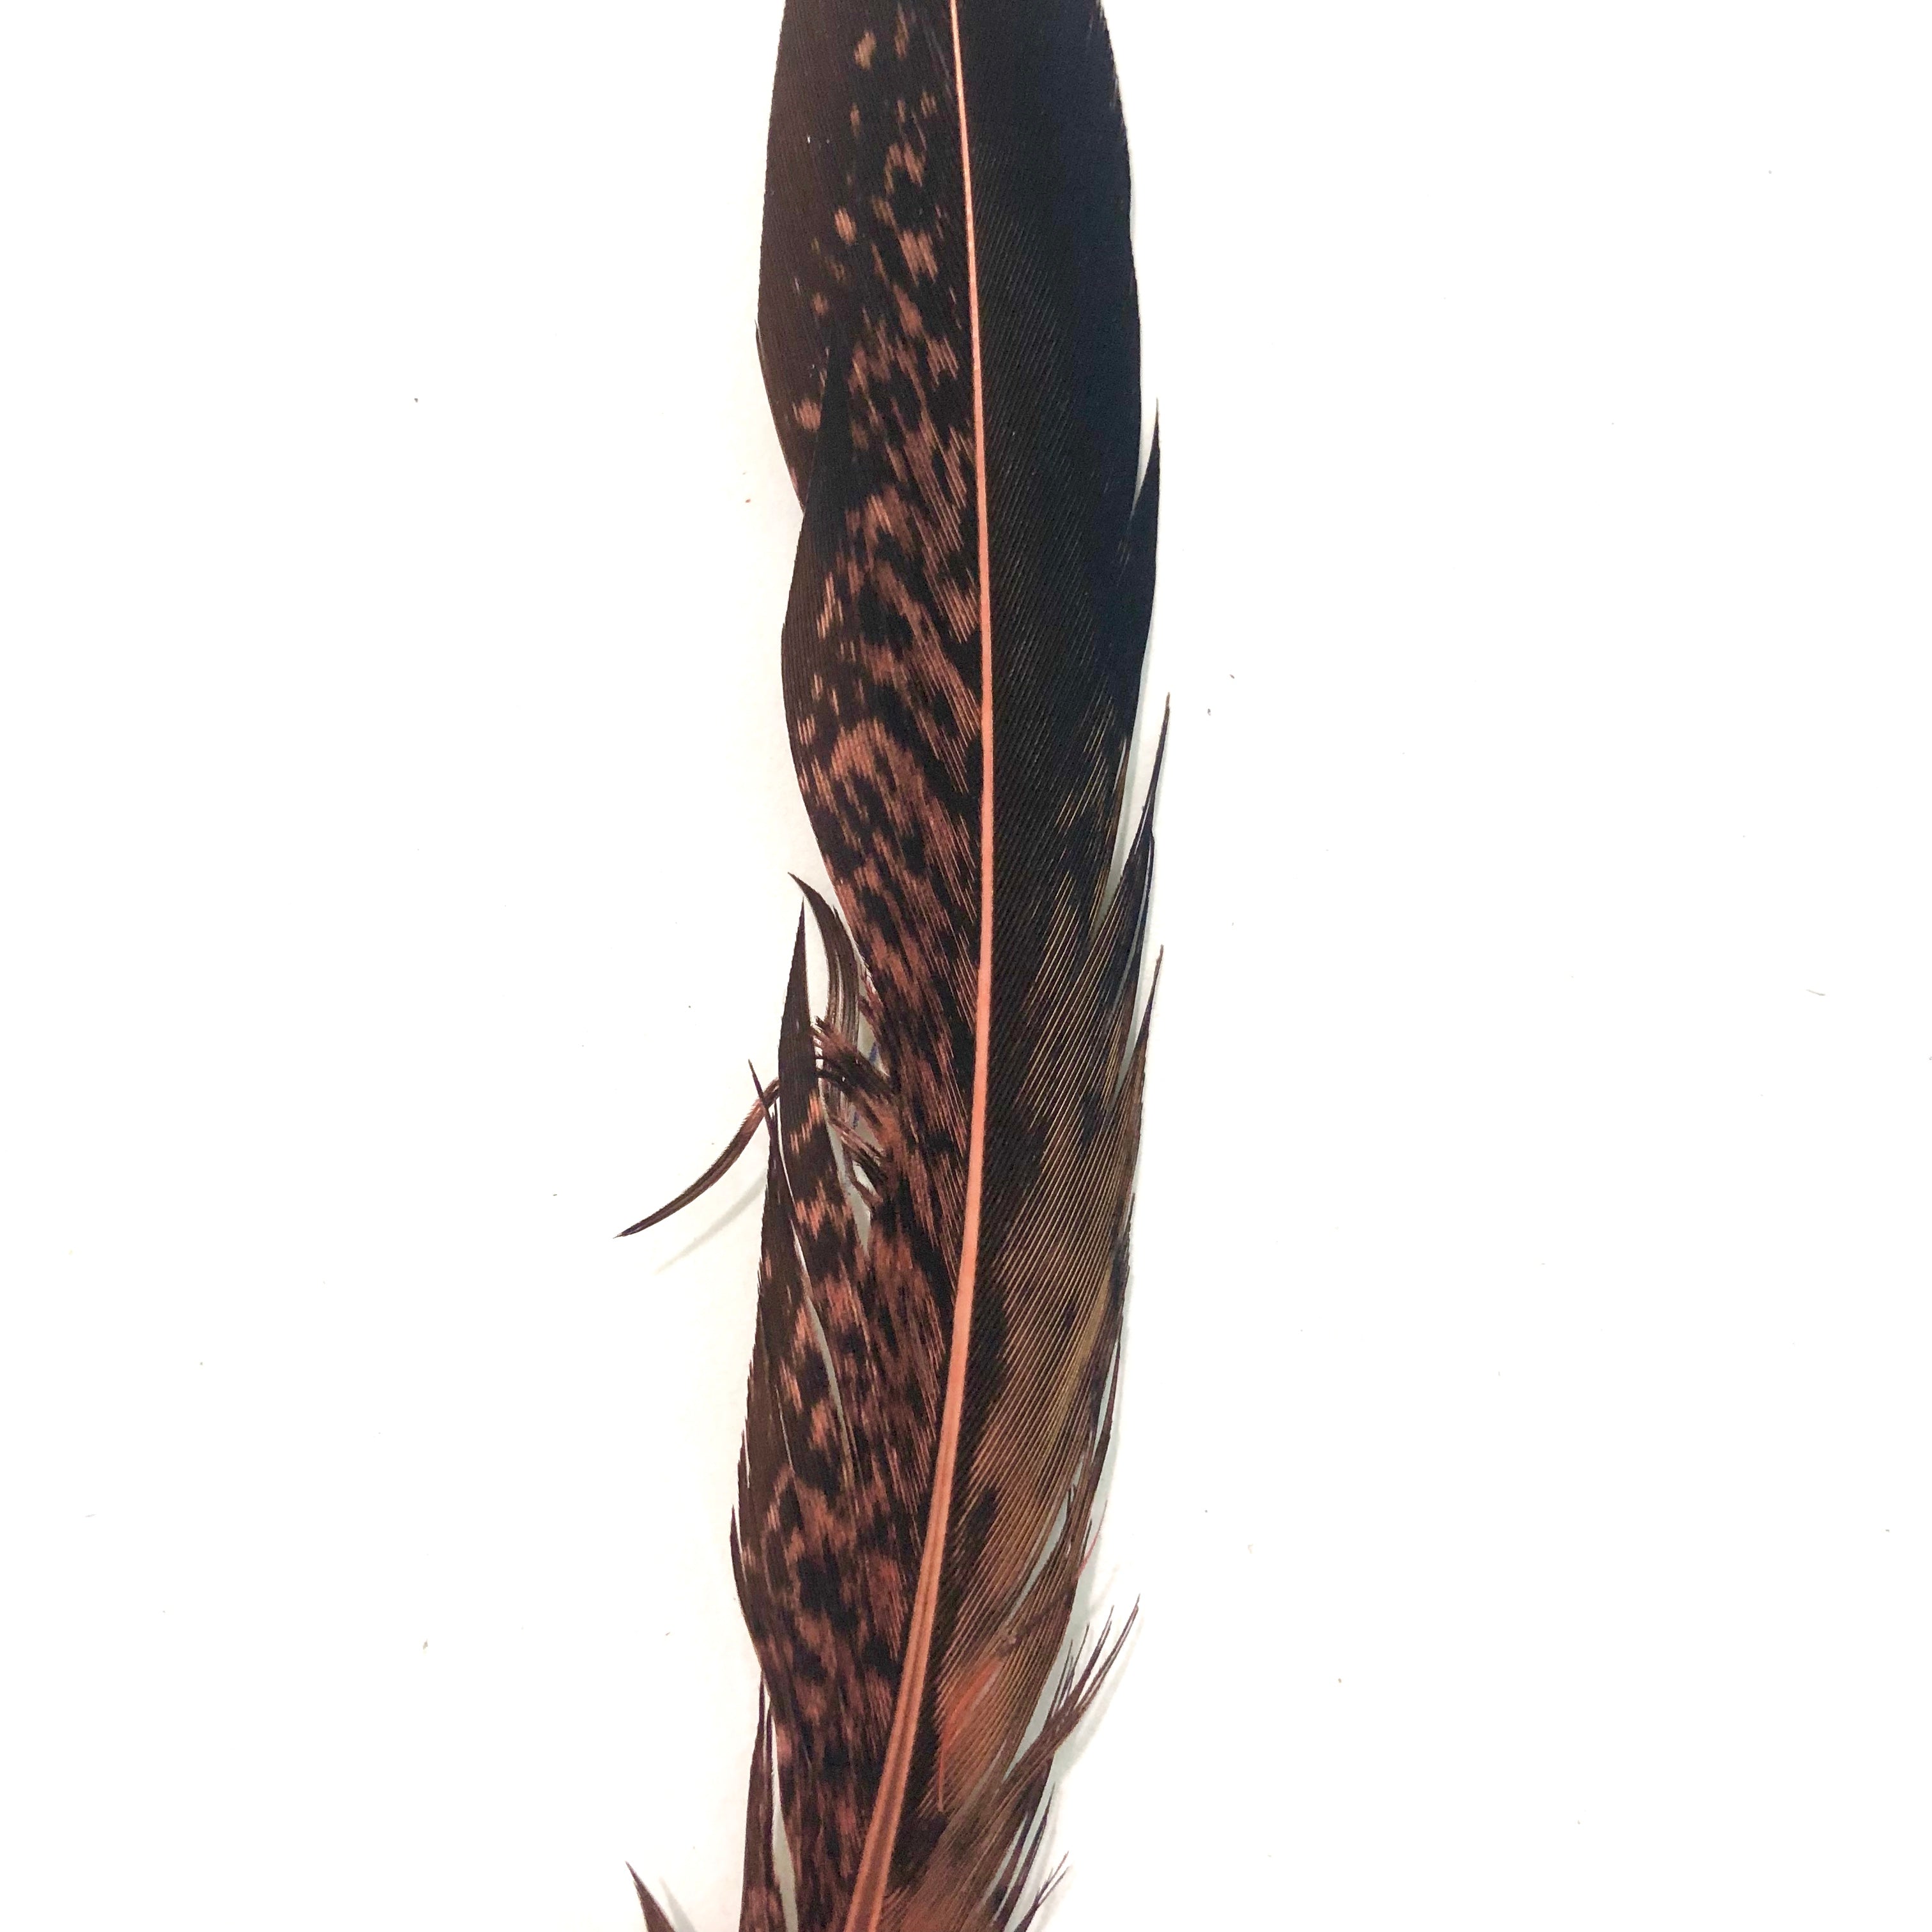 5" to 10" Lady Amherst Pheasant Side Tail Feather x 10 pcs - Dusty Pink